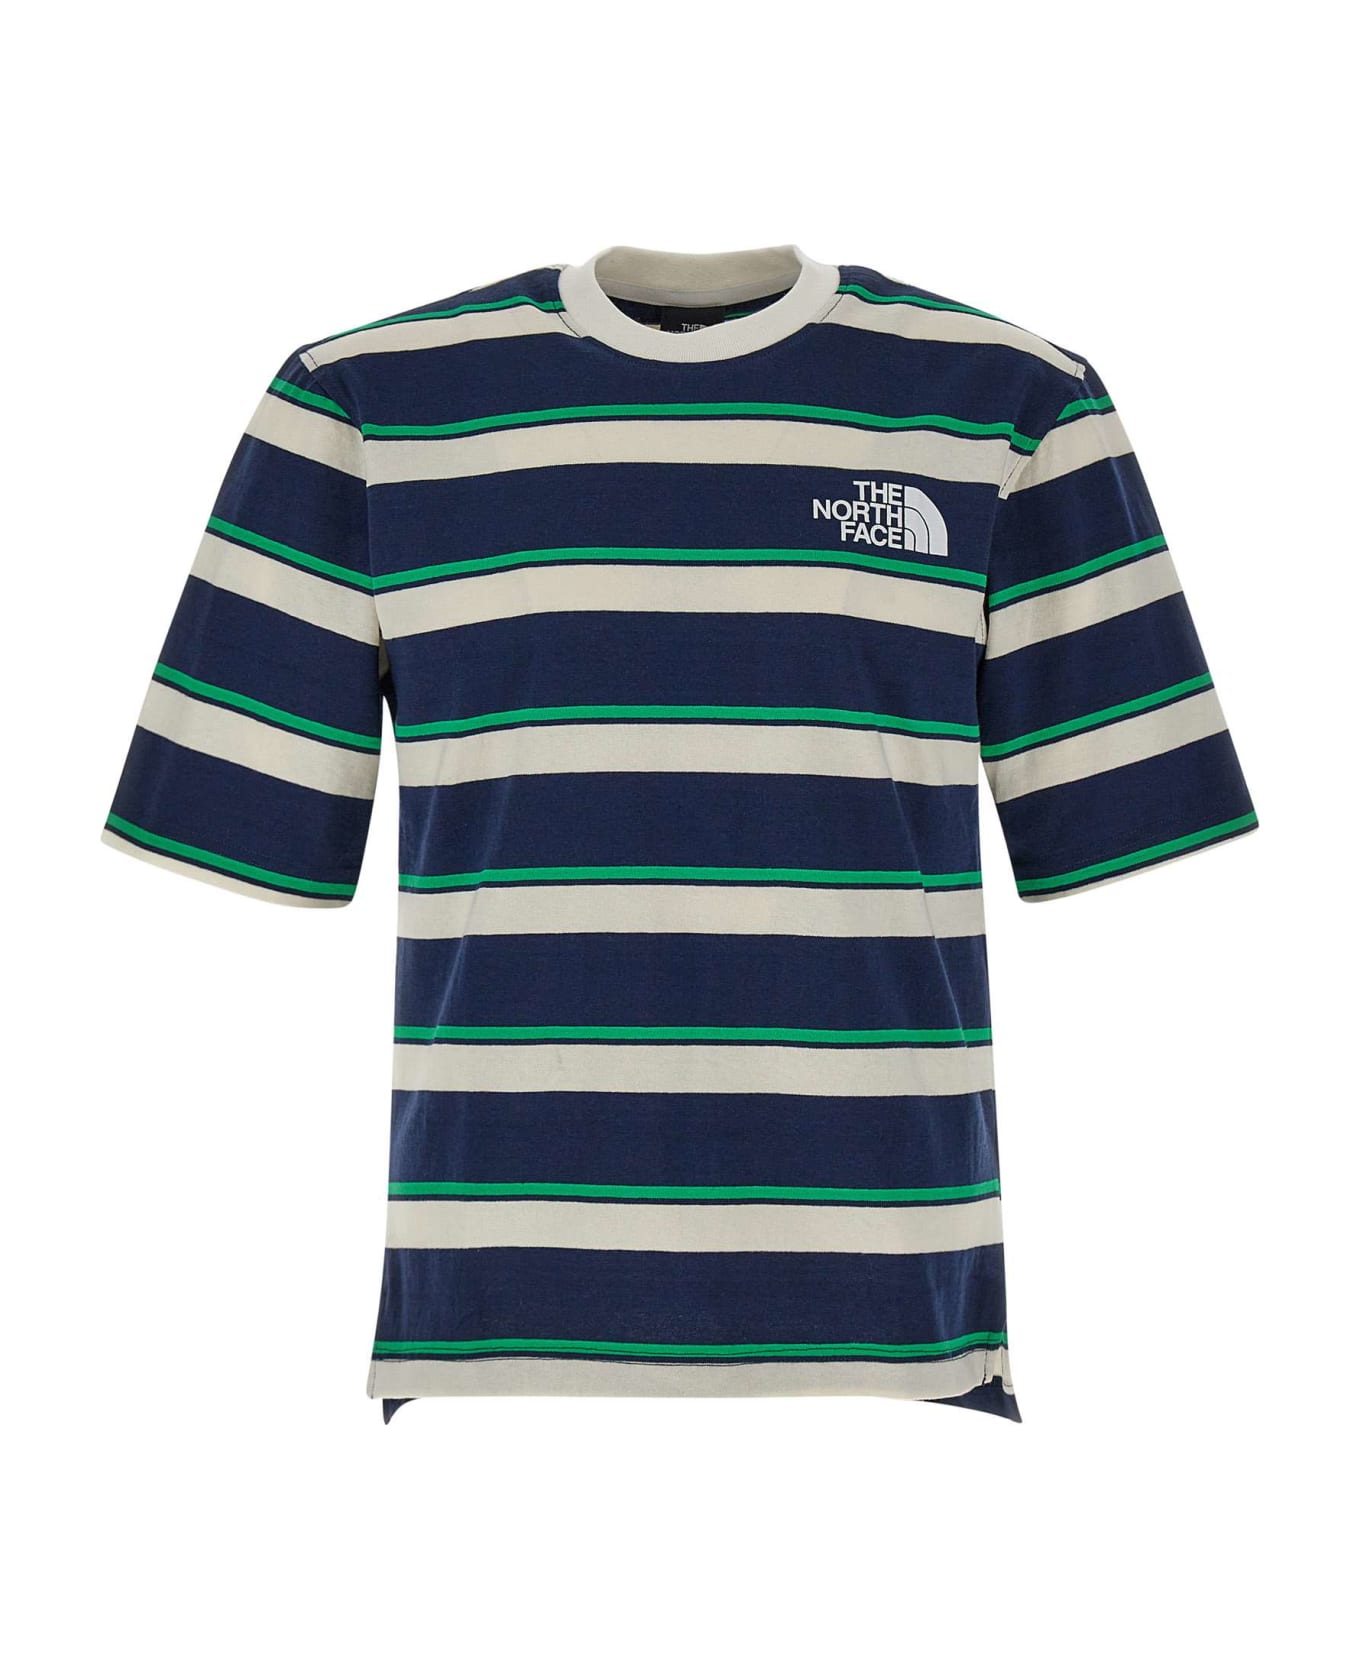 The North Face 'tnf Easy Tee' Cotton T-shirt - Optic emerald